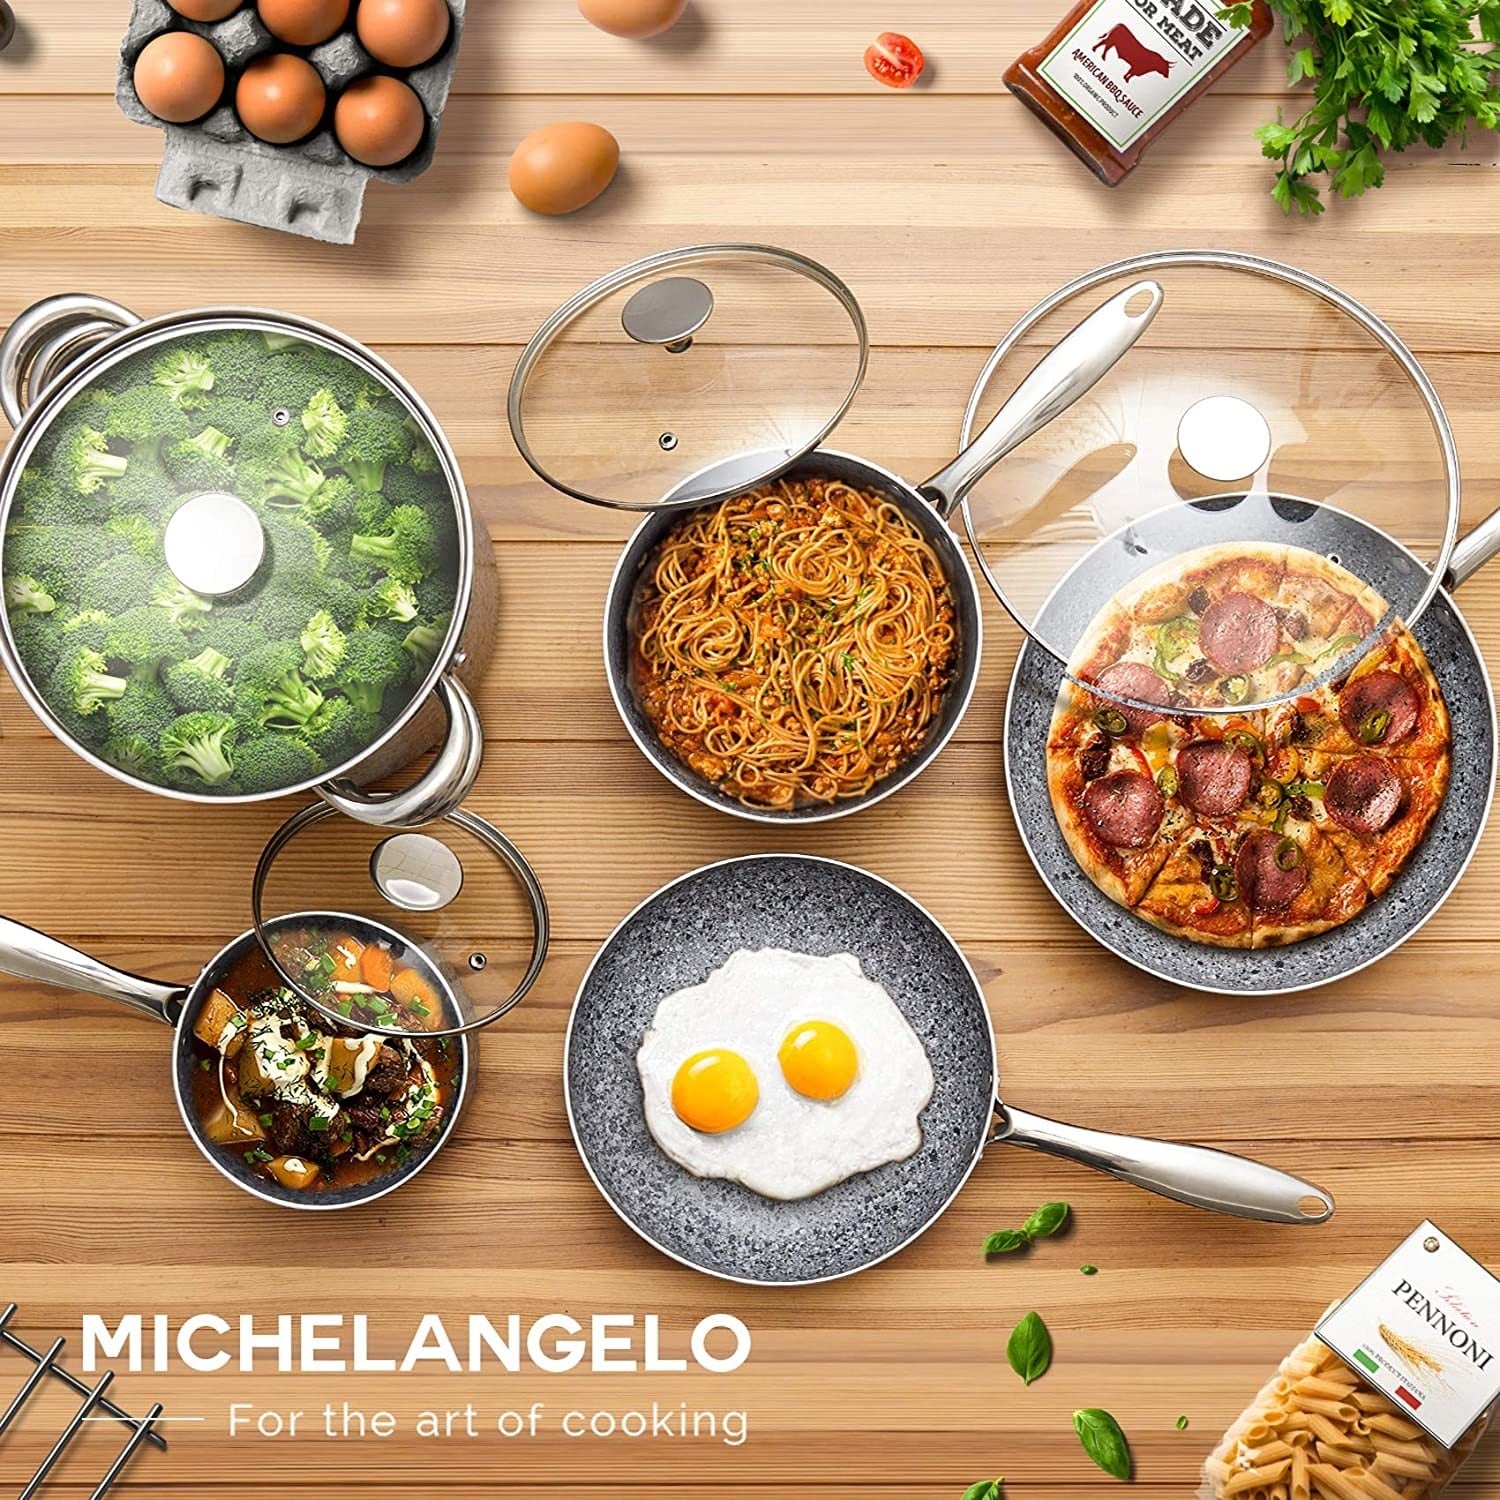 https://ak1.ostkcdn.com/images/products/is/images/direct/1bbdae81d290721b058ddca828290a281b0afda4/MICHELANGELO-Stone-Cookware-Set-10-Piece%2C-Ultra-Nonstick-Granite-Pots-and-Pans---10-Piece.jpg